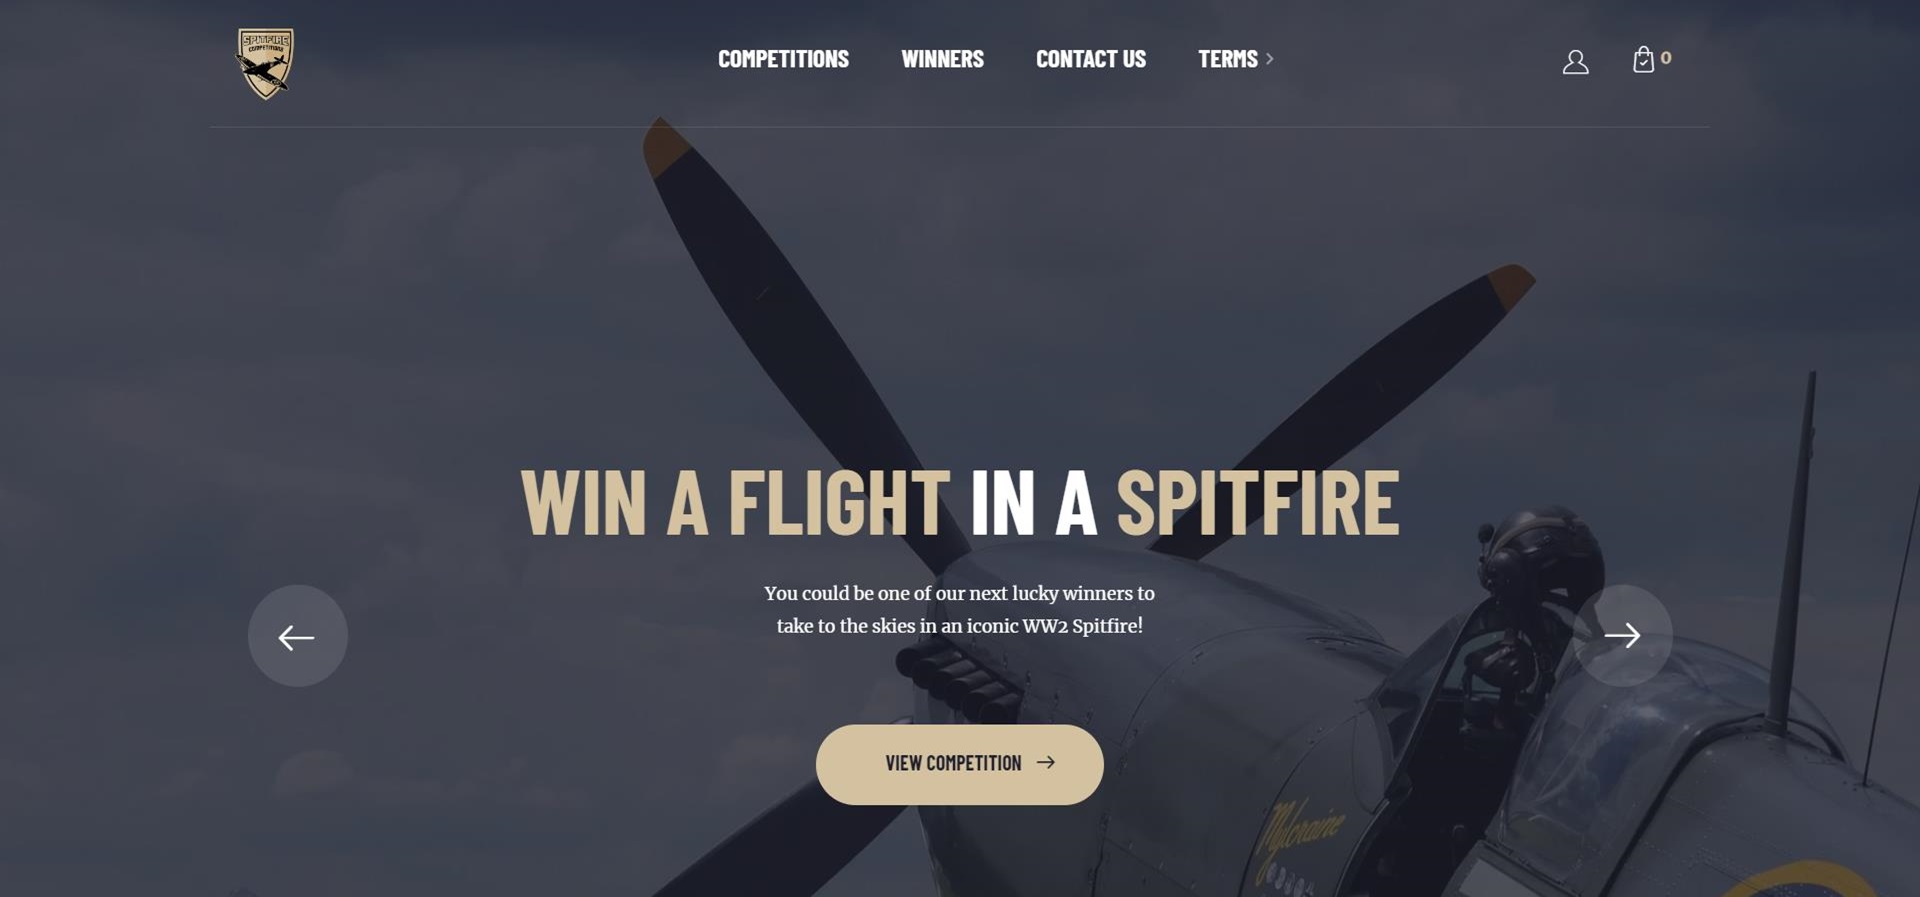 spitfire competitions homepage